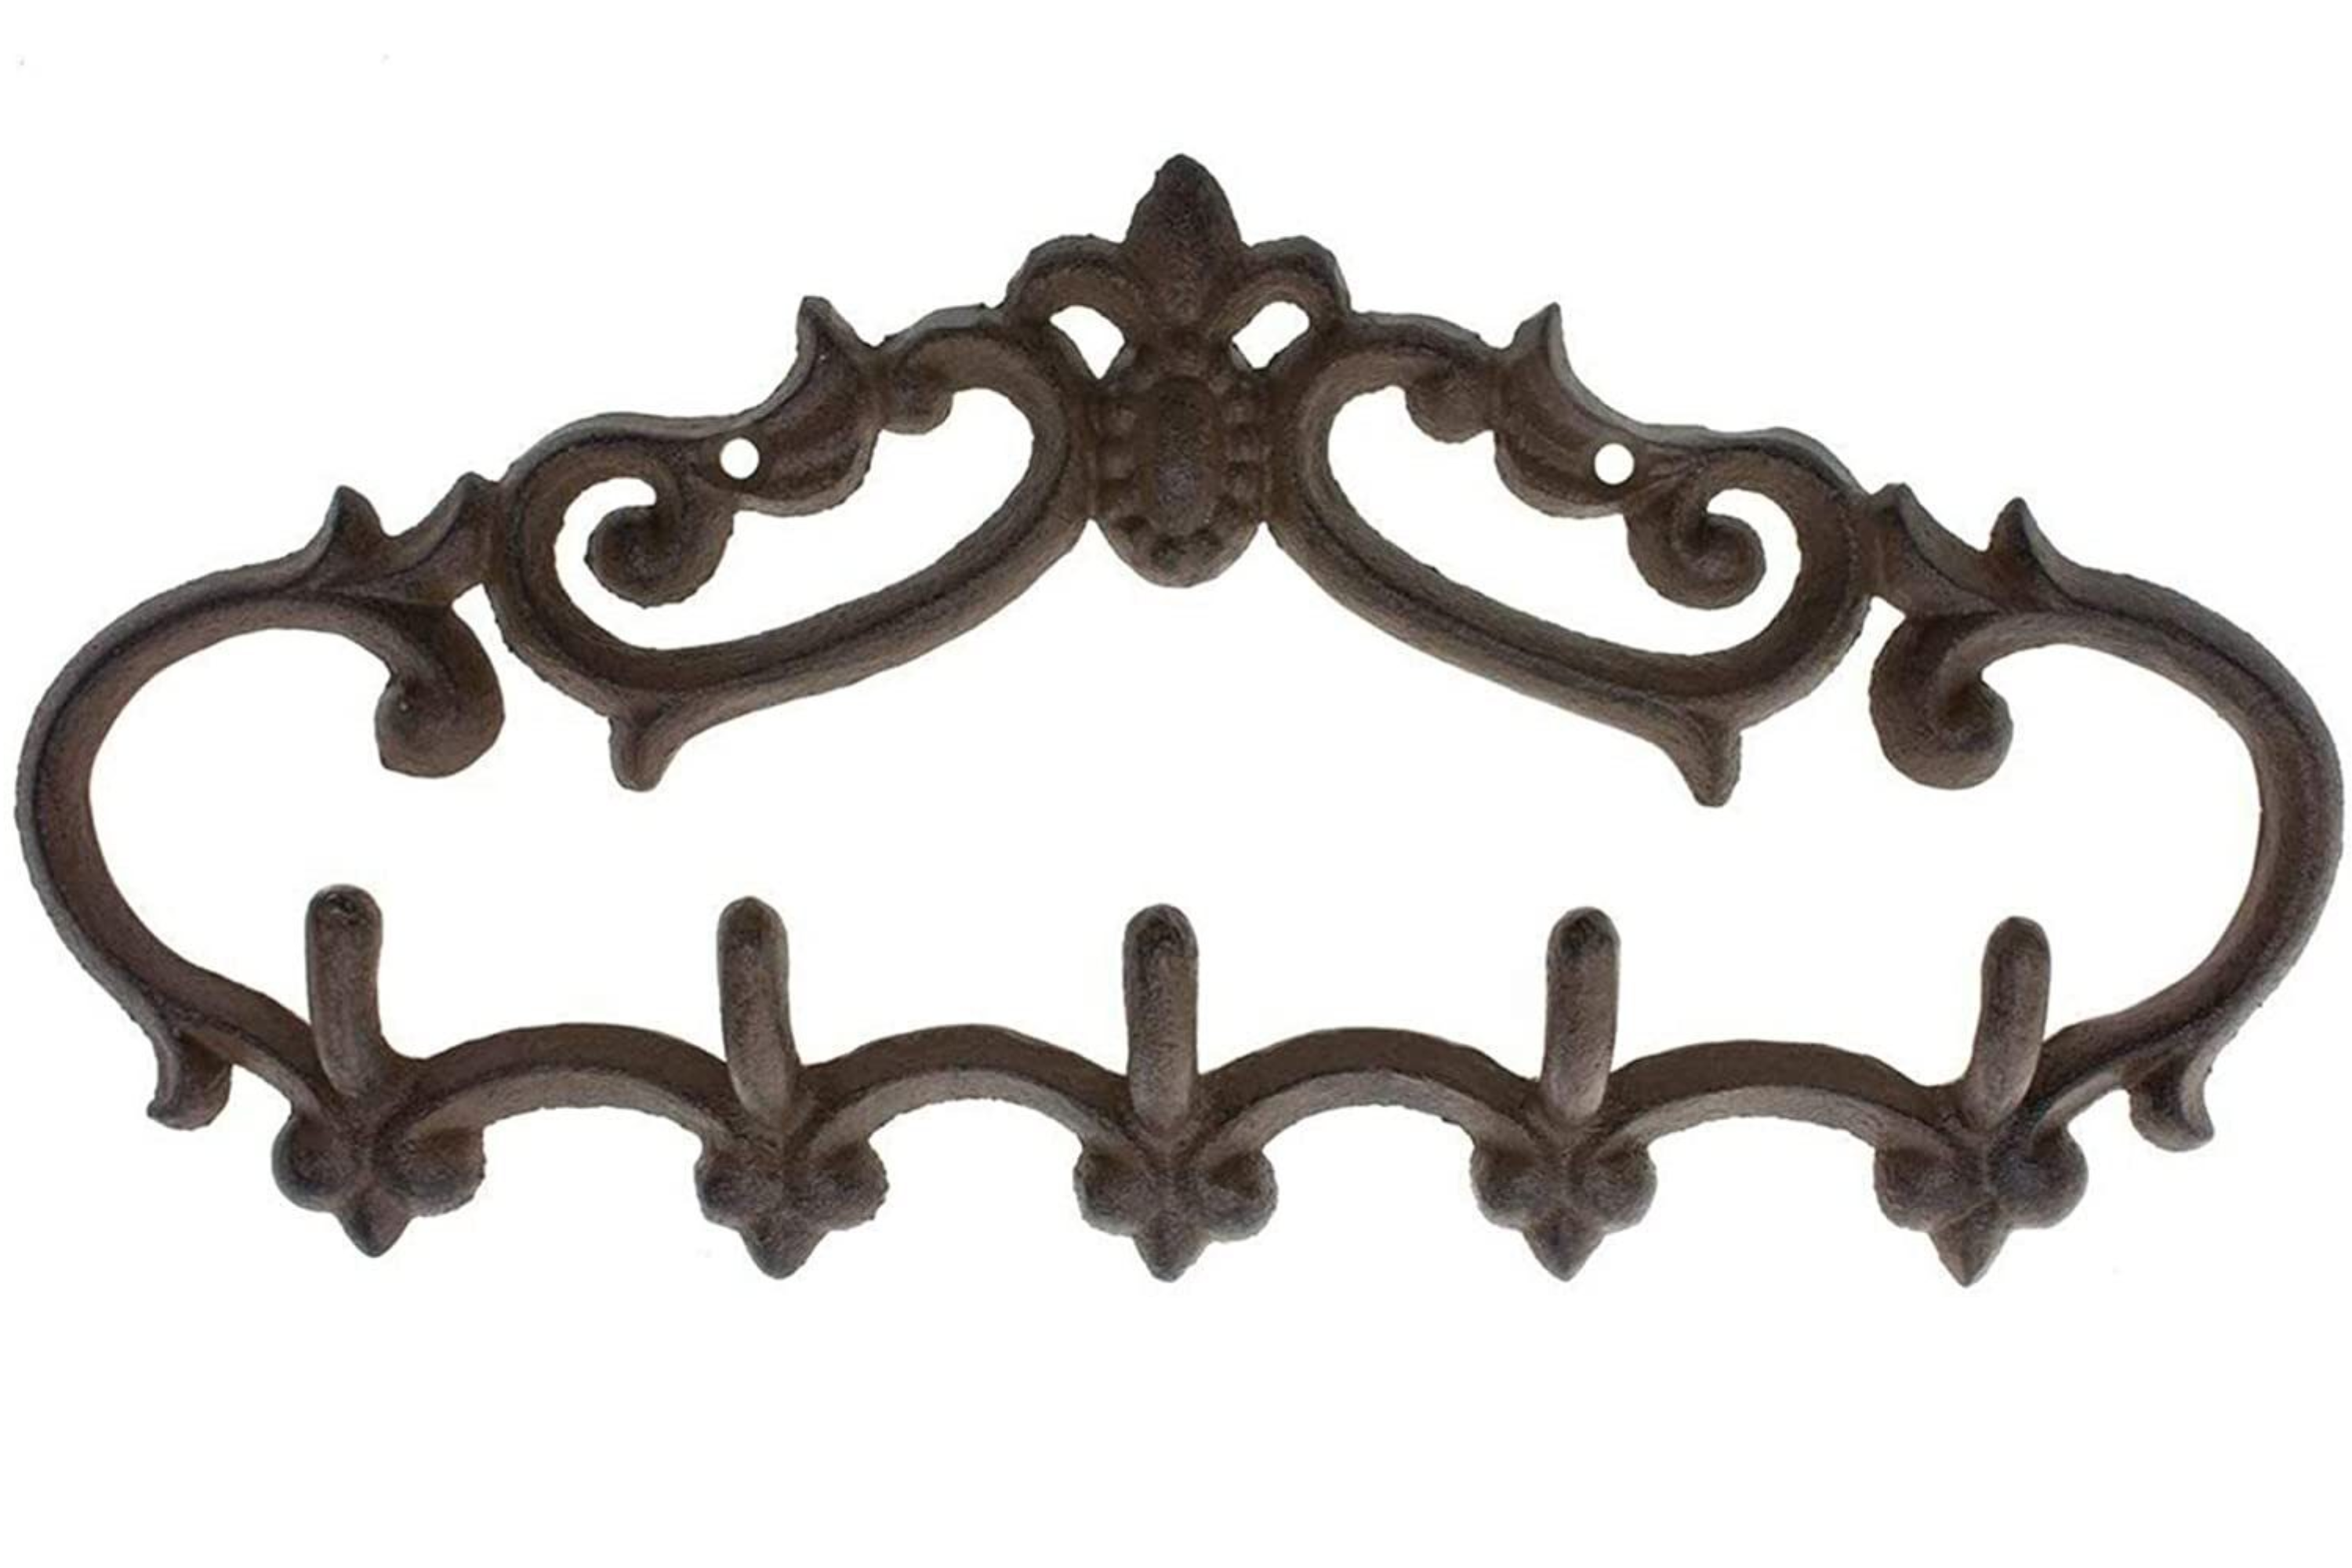 Comfify Cast Iron Wall Hanger – Vintage Design with 5 Hooks - Keys, Towels, Etc - Wall Mounted, Metal, Heavy Duty, Rustic, Vintage, Decorative